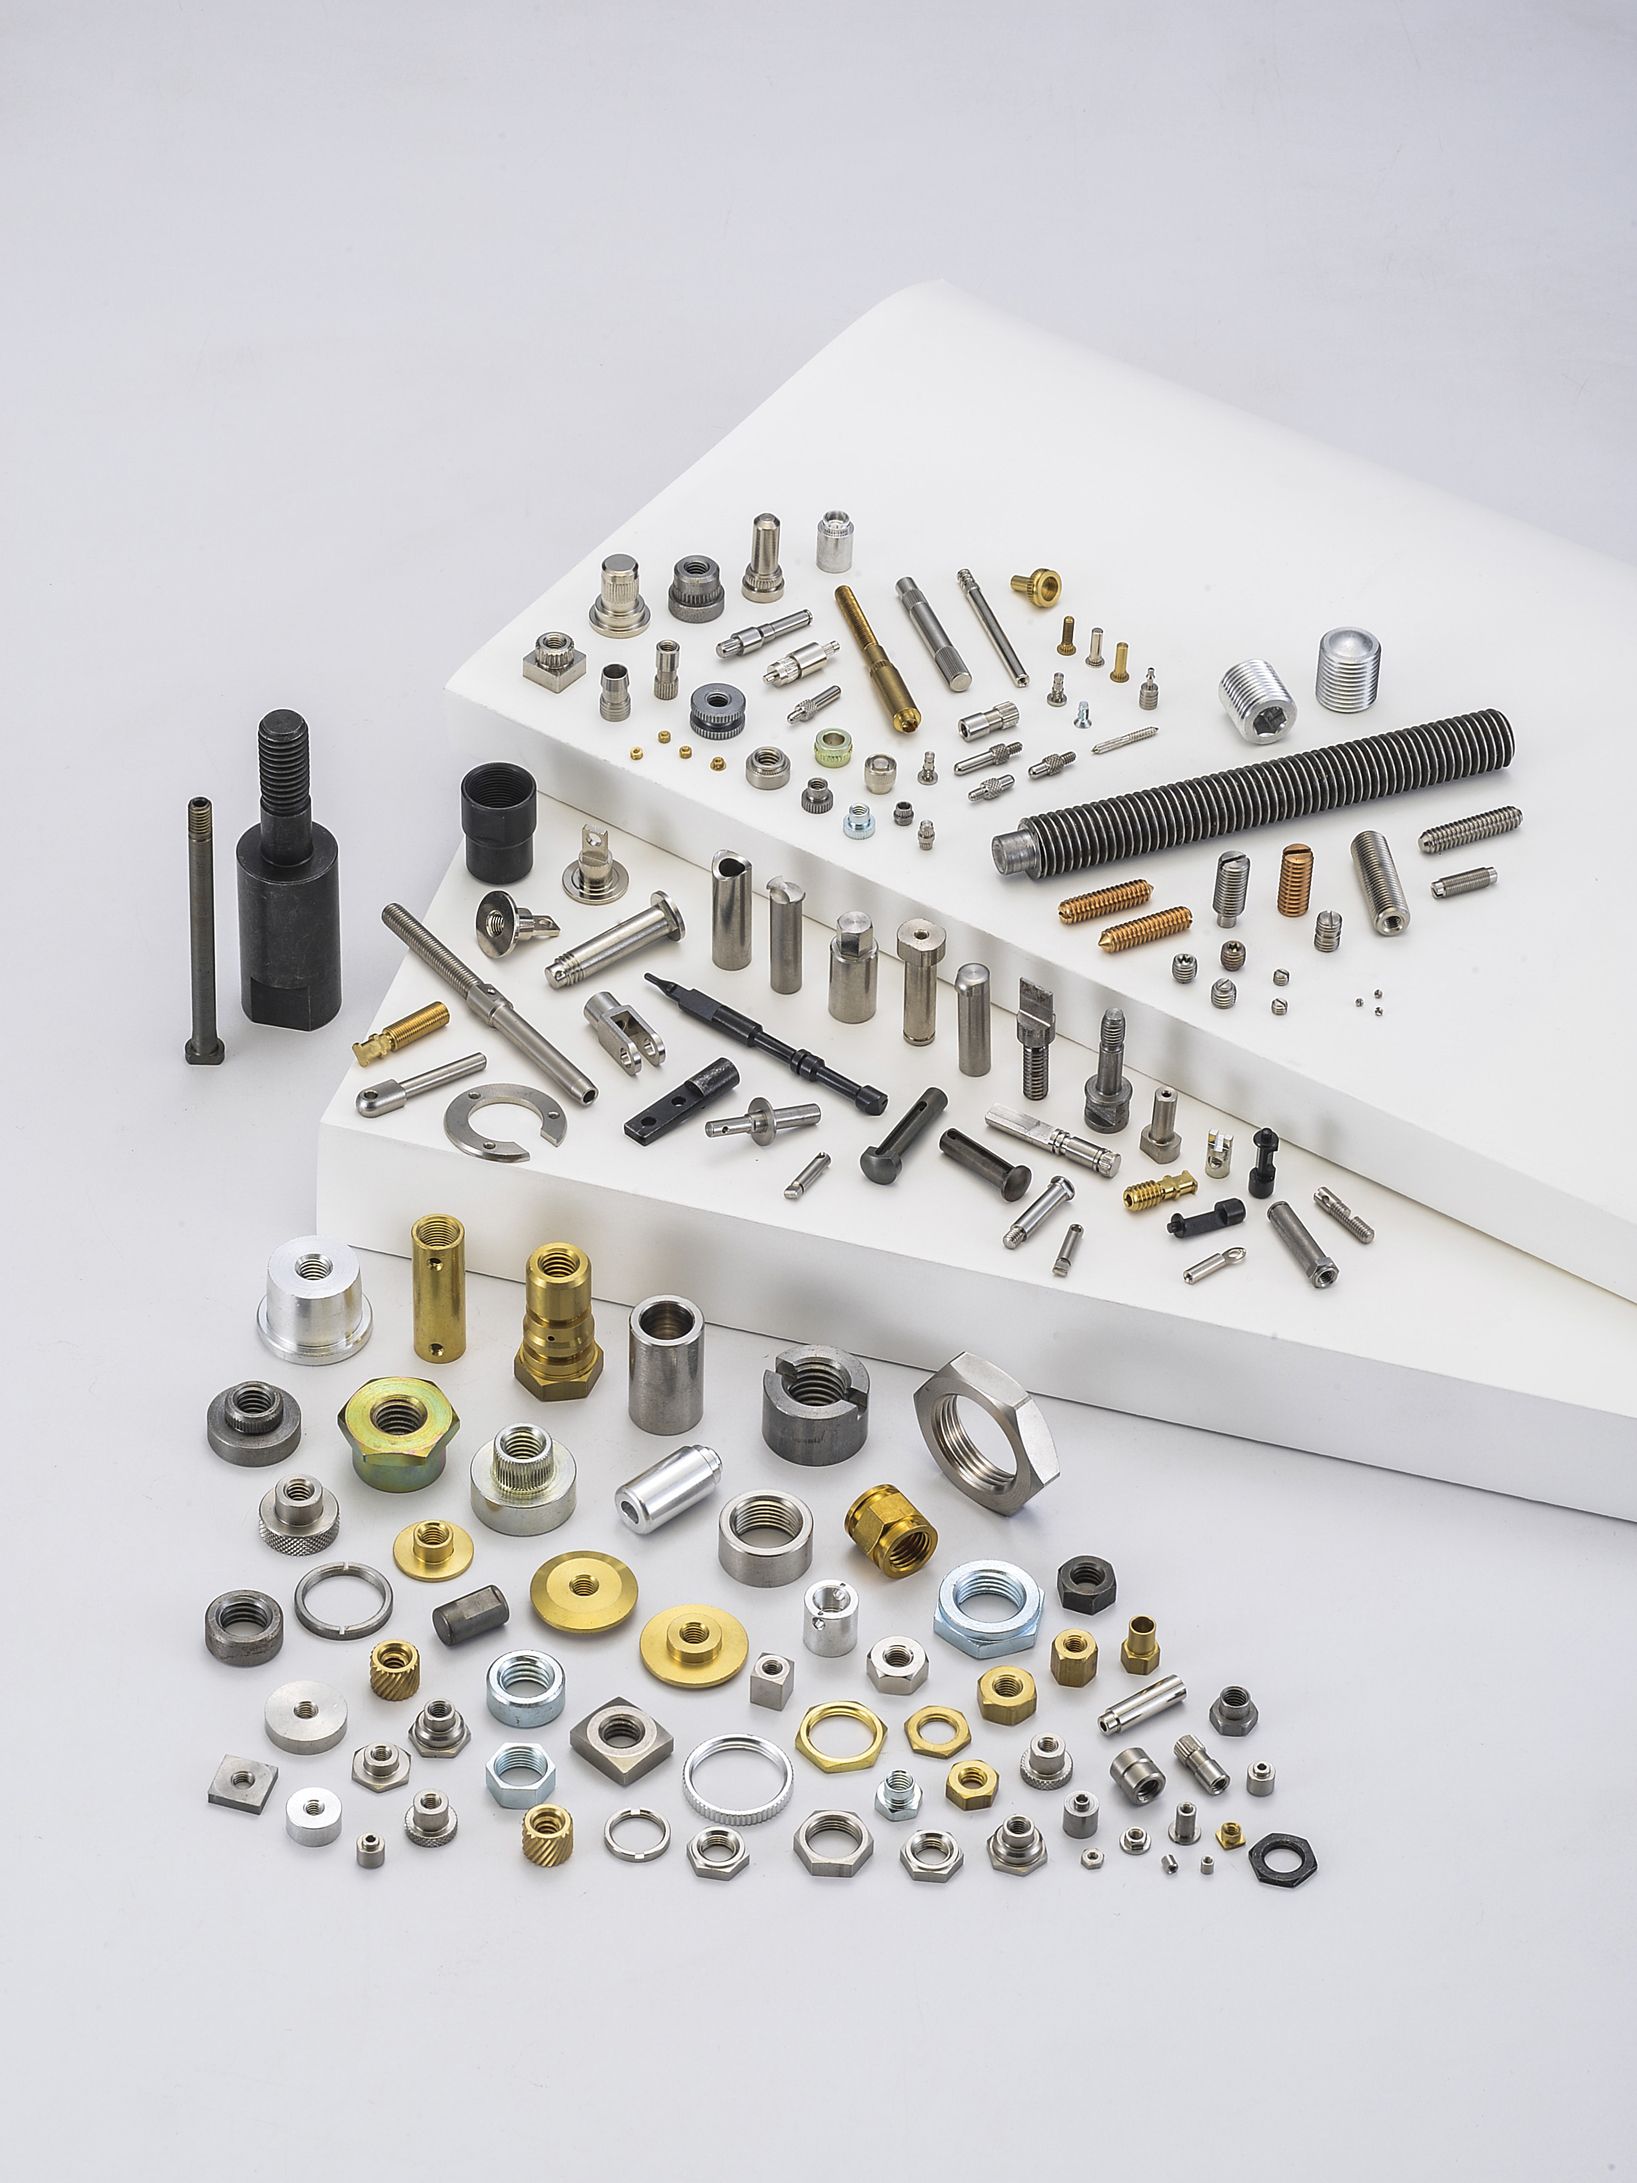 What kind of fasteners can you manufacture?